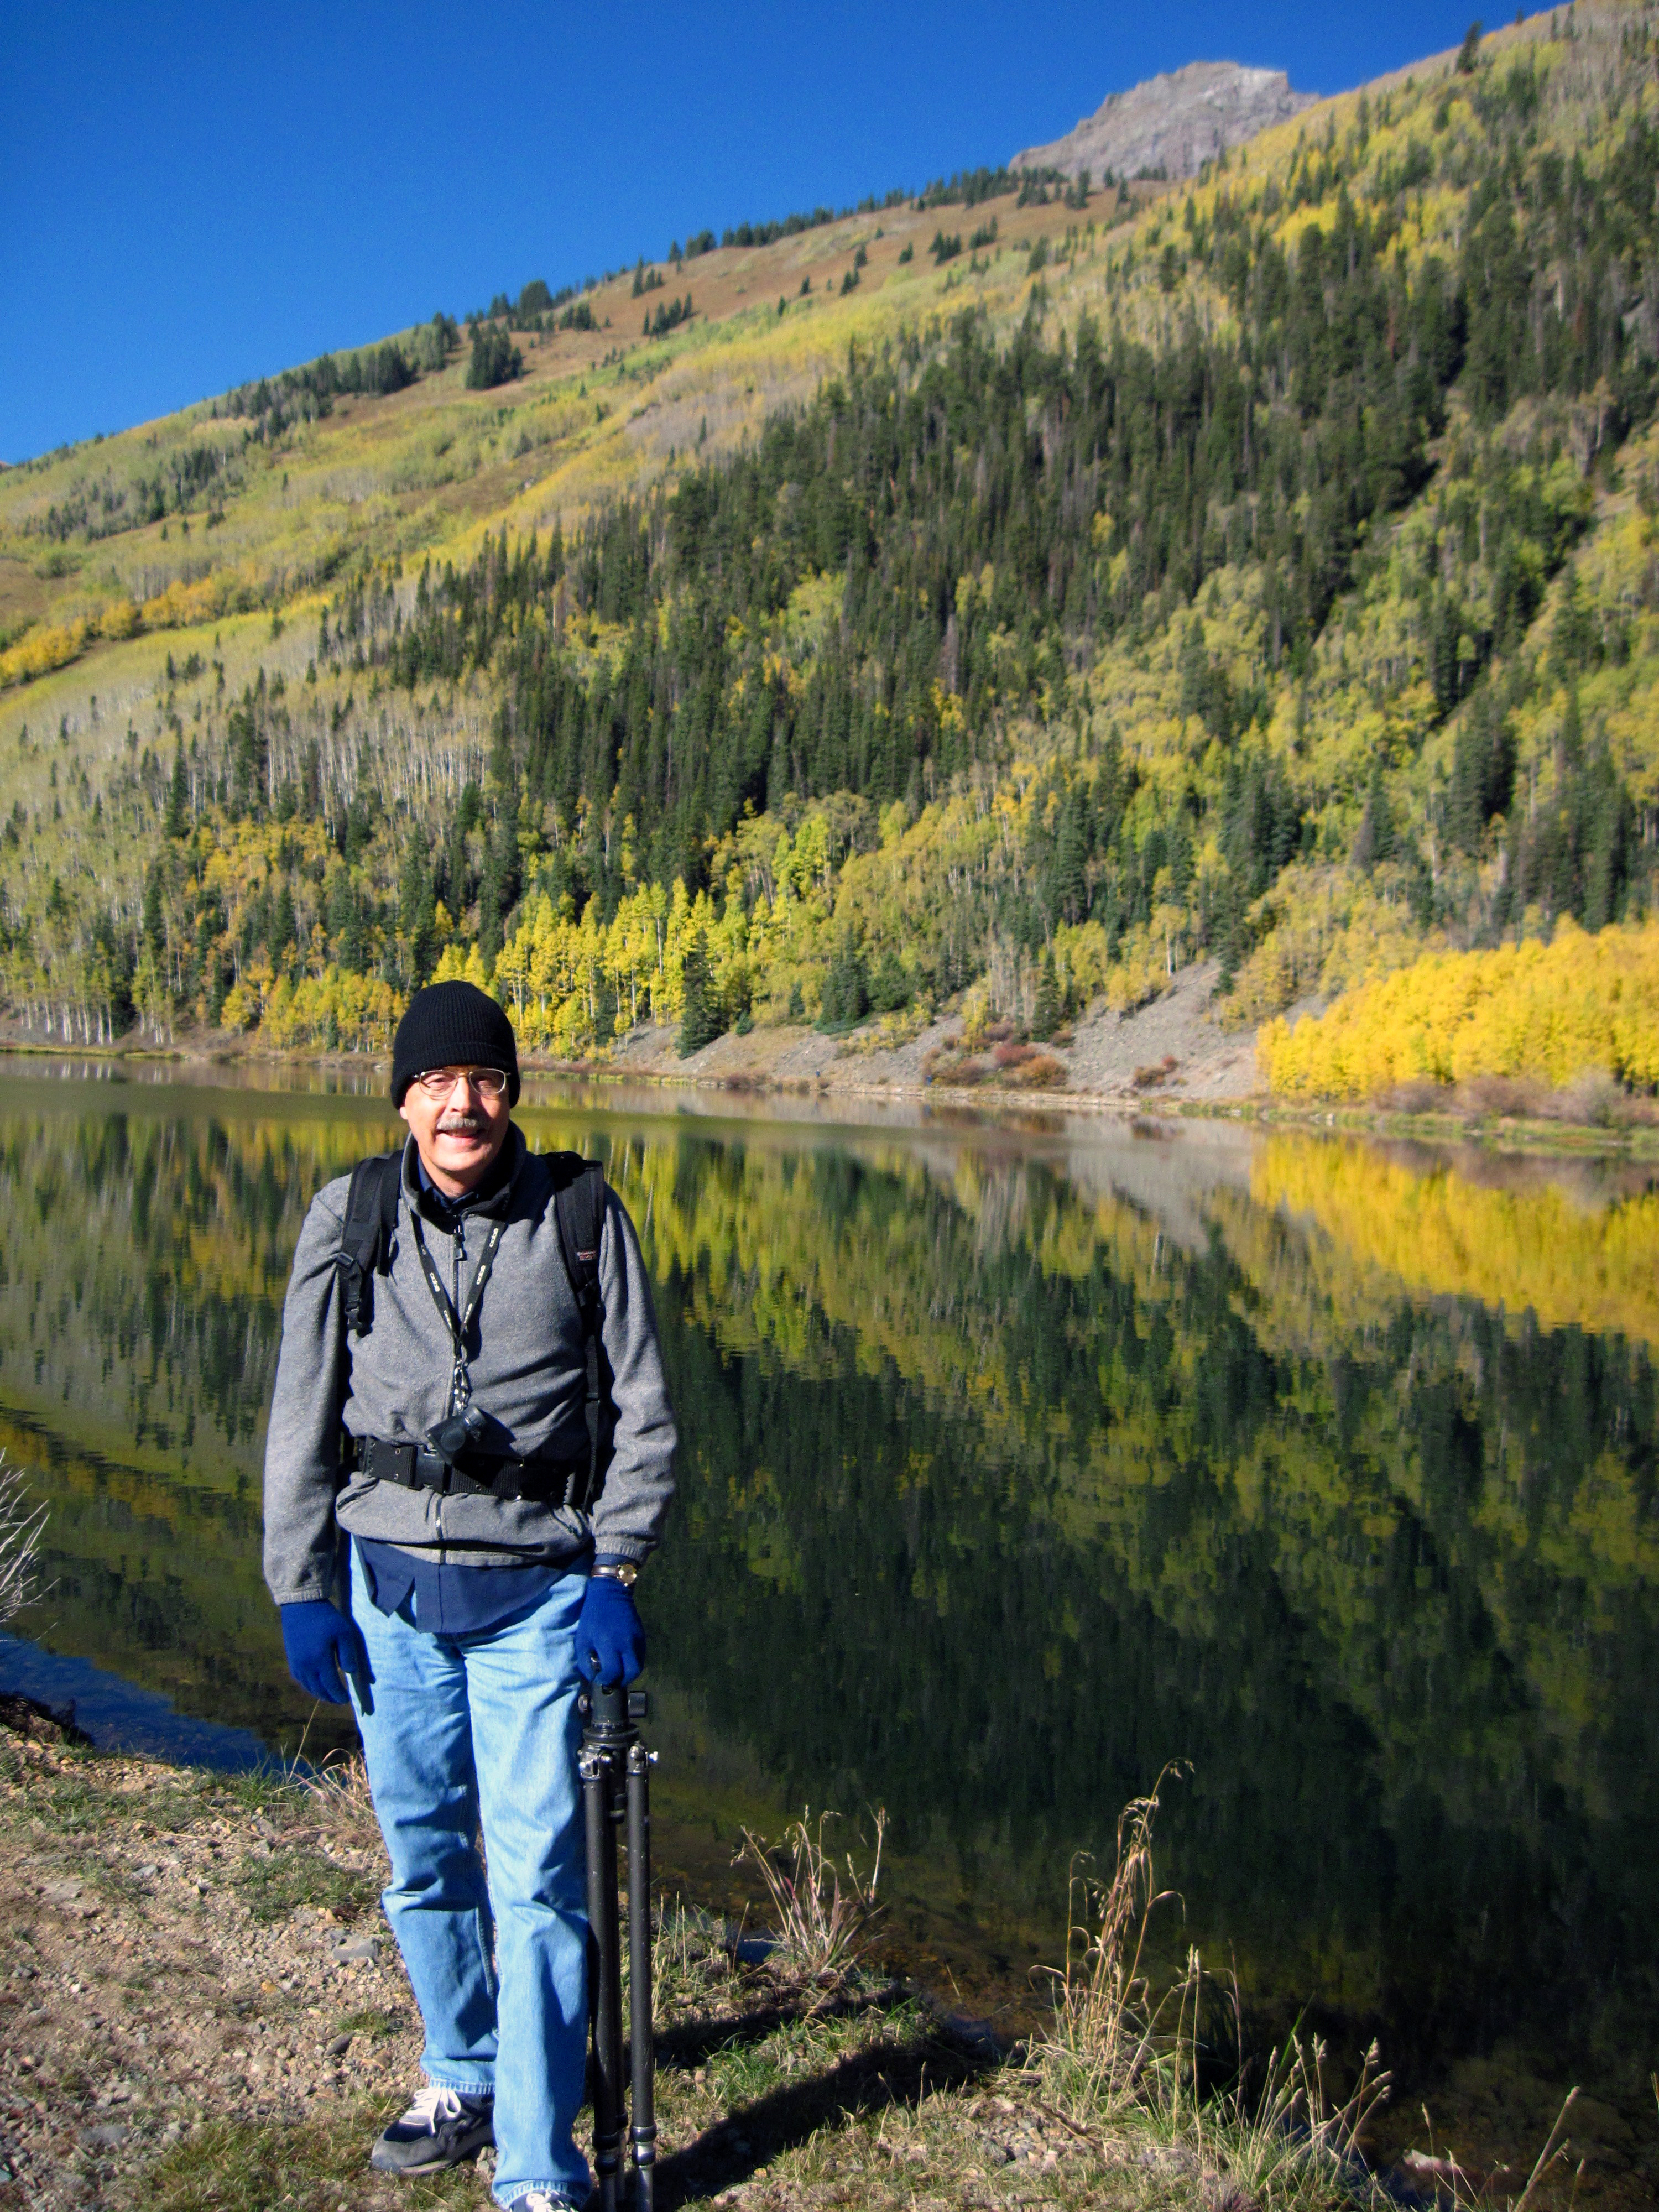 Norman at Crystal Lake  -  Uncompahgre National Forest, Colorado.  Photograph by Jean Nokleby.